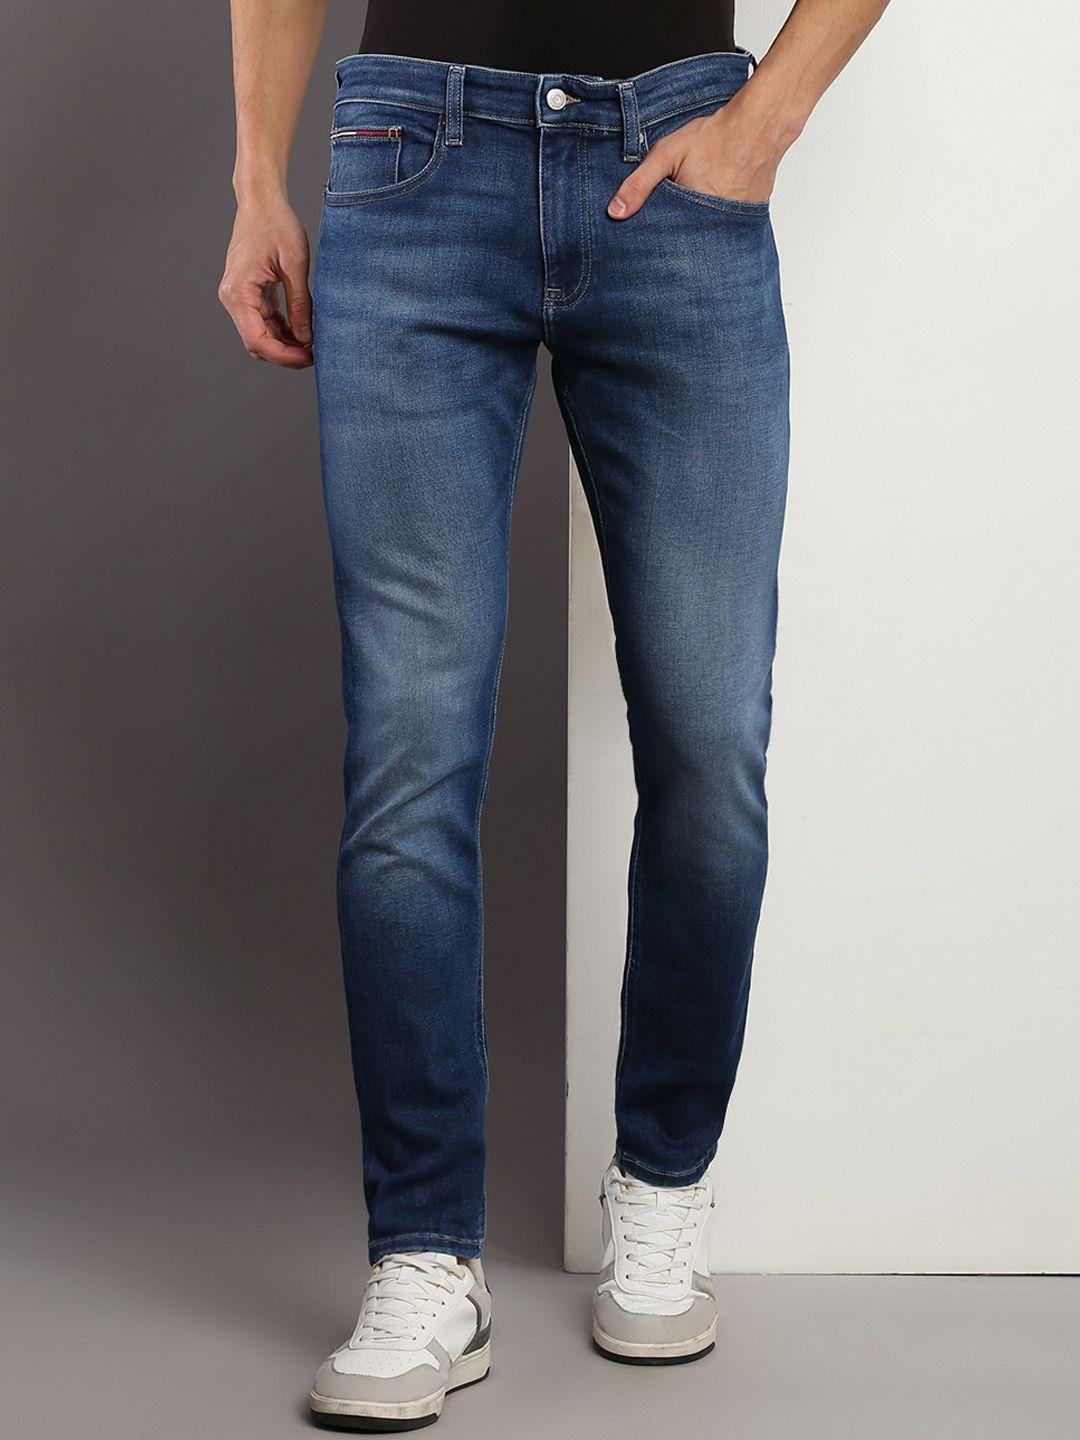 tommy-hilfiger-men-tapered-fit-light-fade-stretchable-jeans